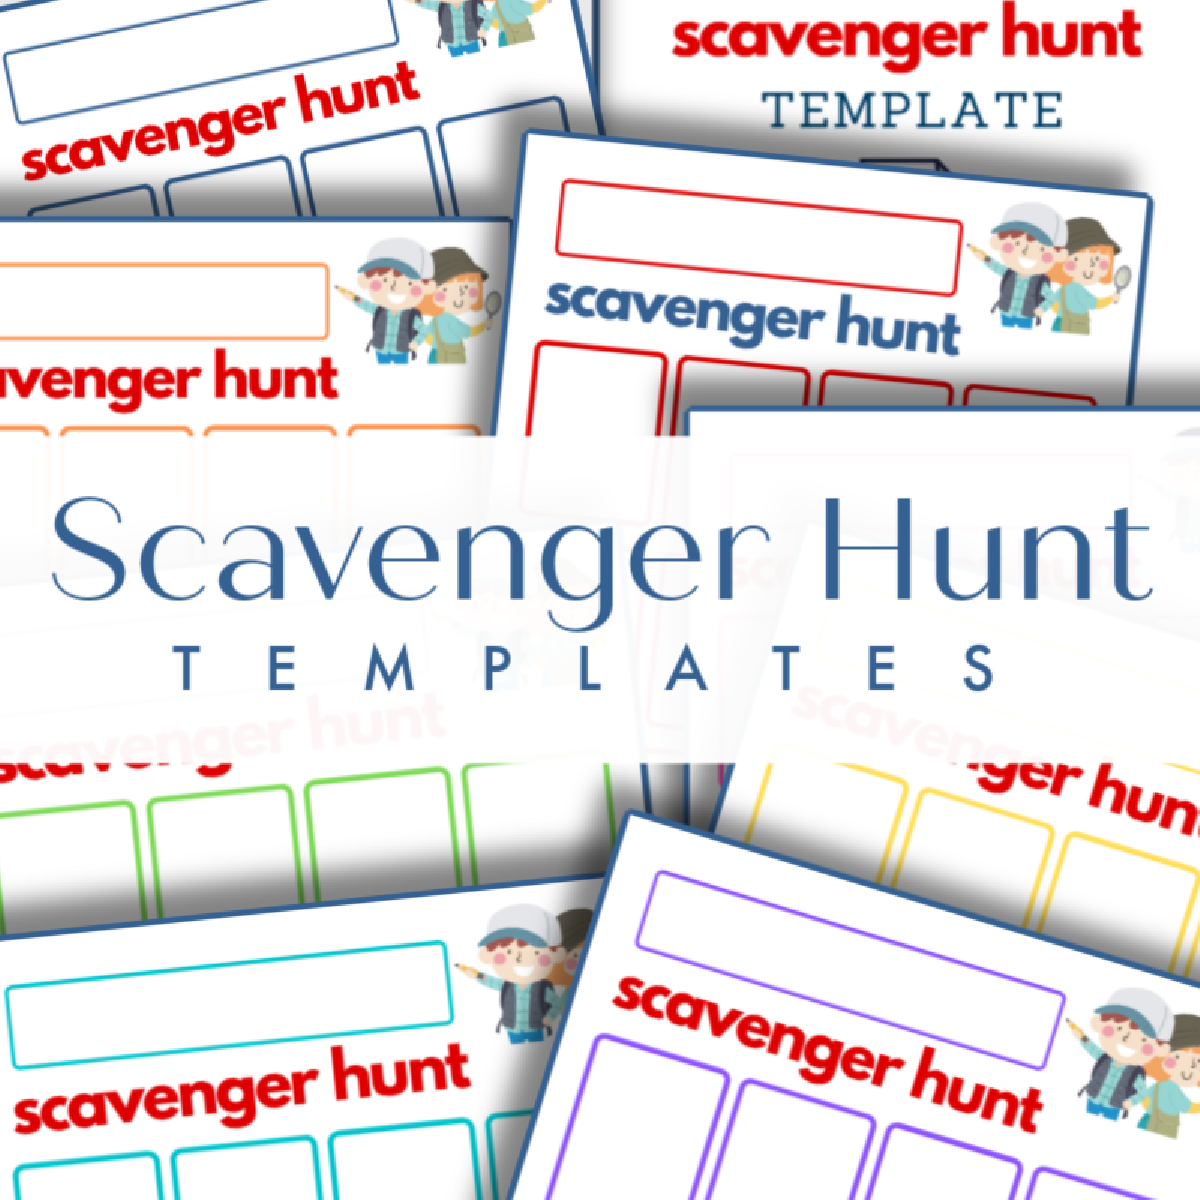 Personalized Scavenger Hunt Template printables for kids from the Organized 31 Shop.